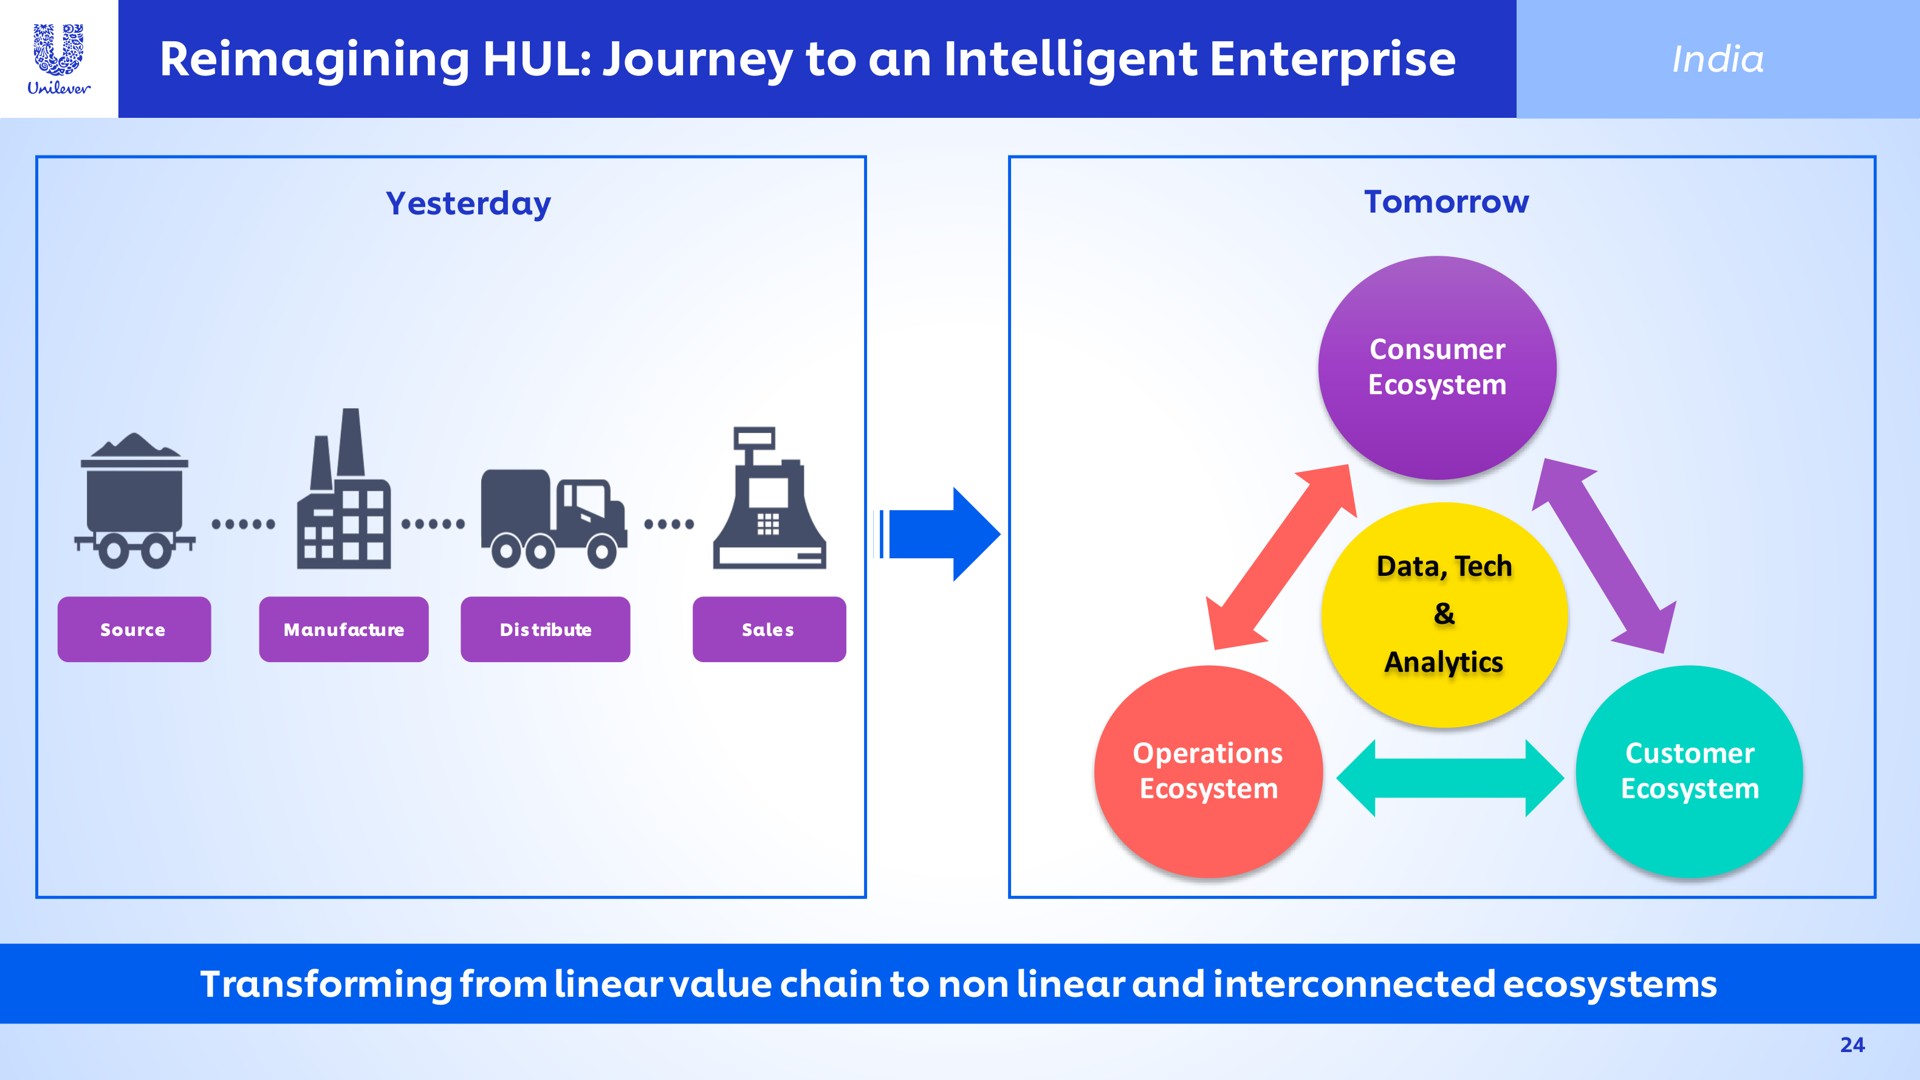 journey to an intelligent enterprise ecosystem transforming from linear value chain non linear and interconnected ecosystems | Unilever